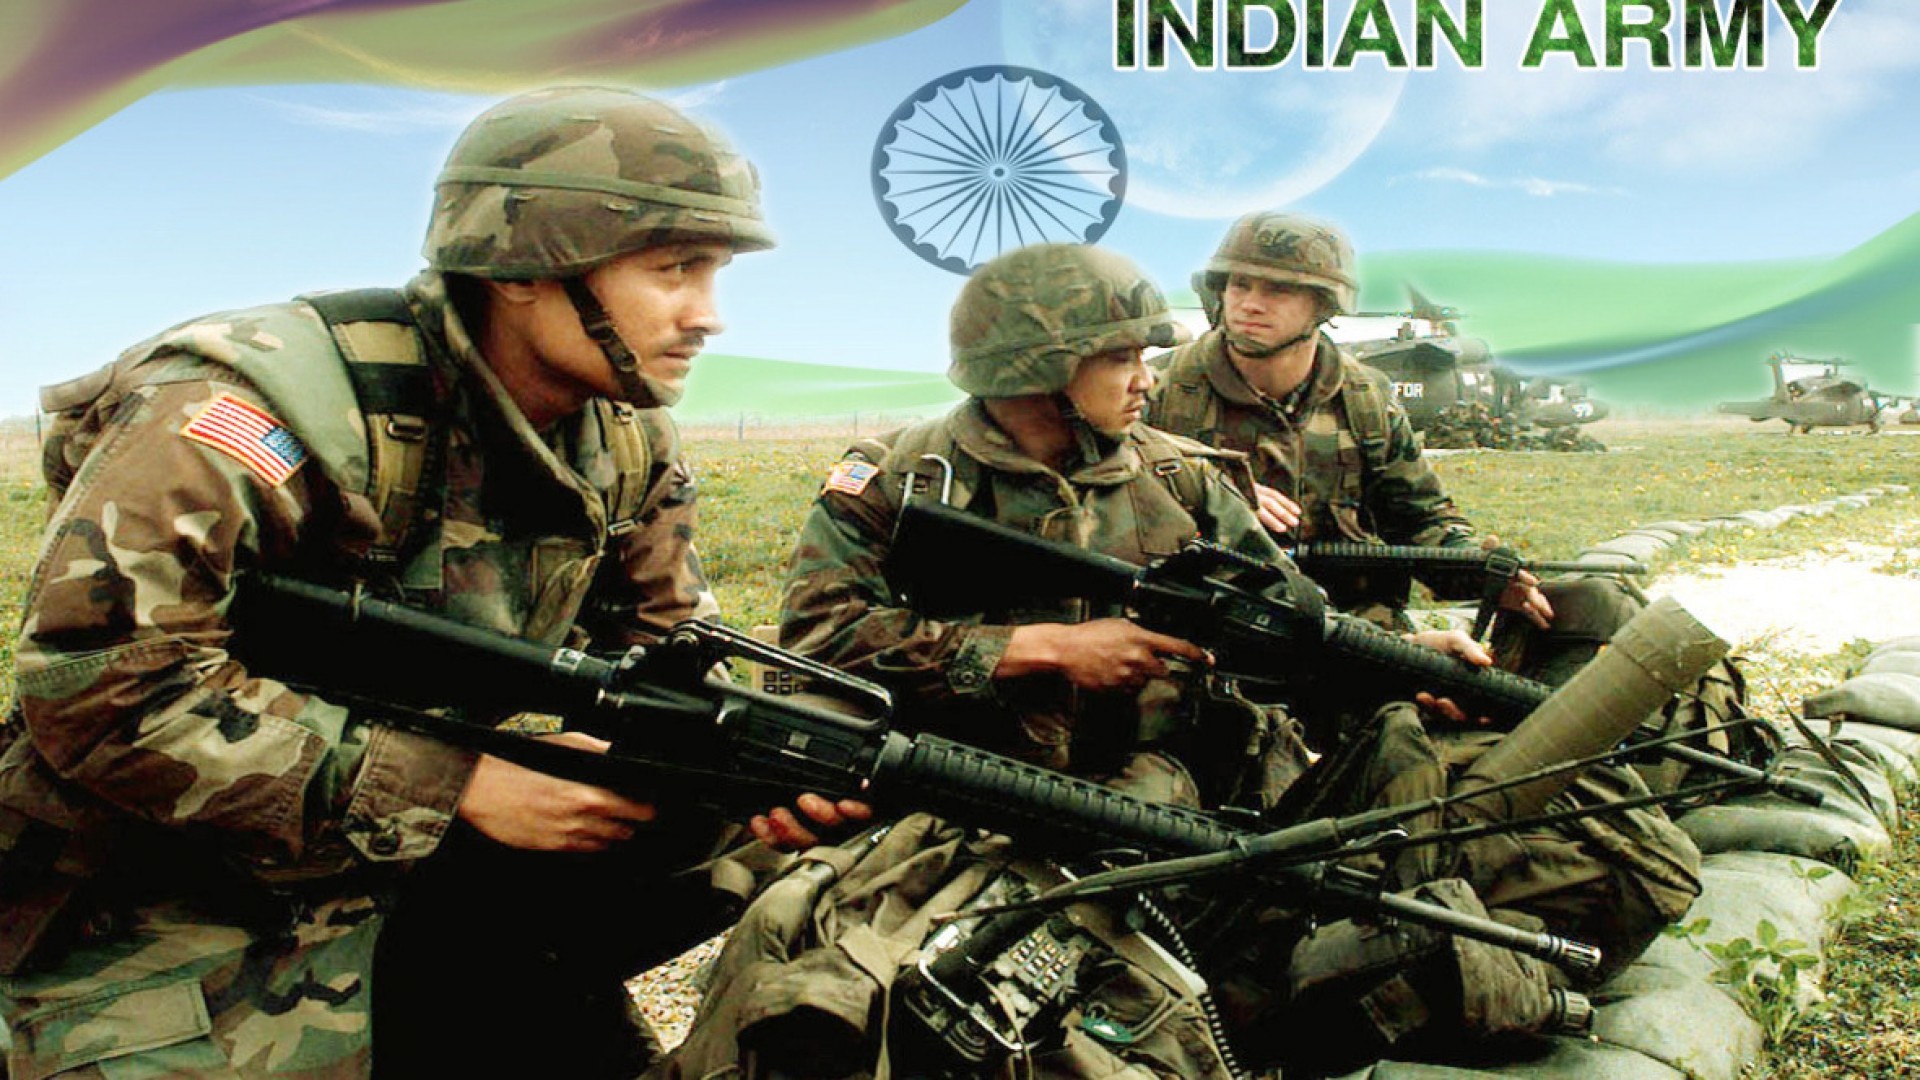 Indian Army HD Wallpaper (54+ images)